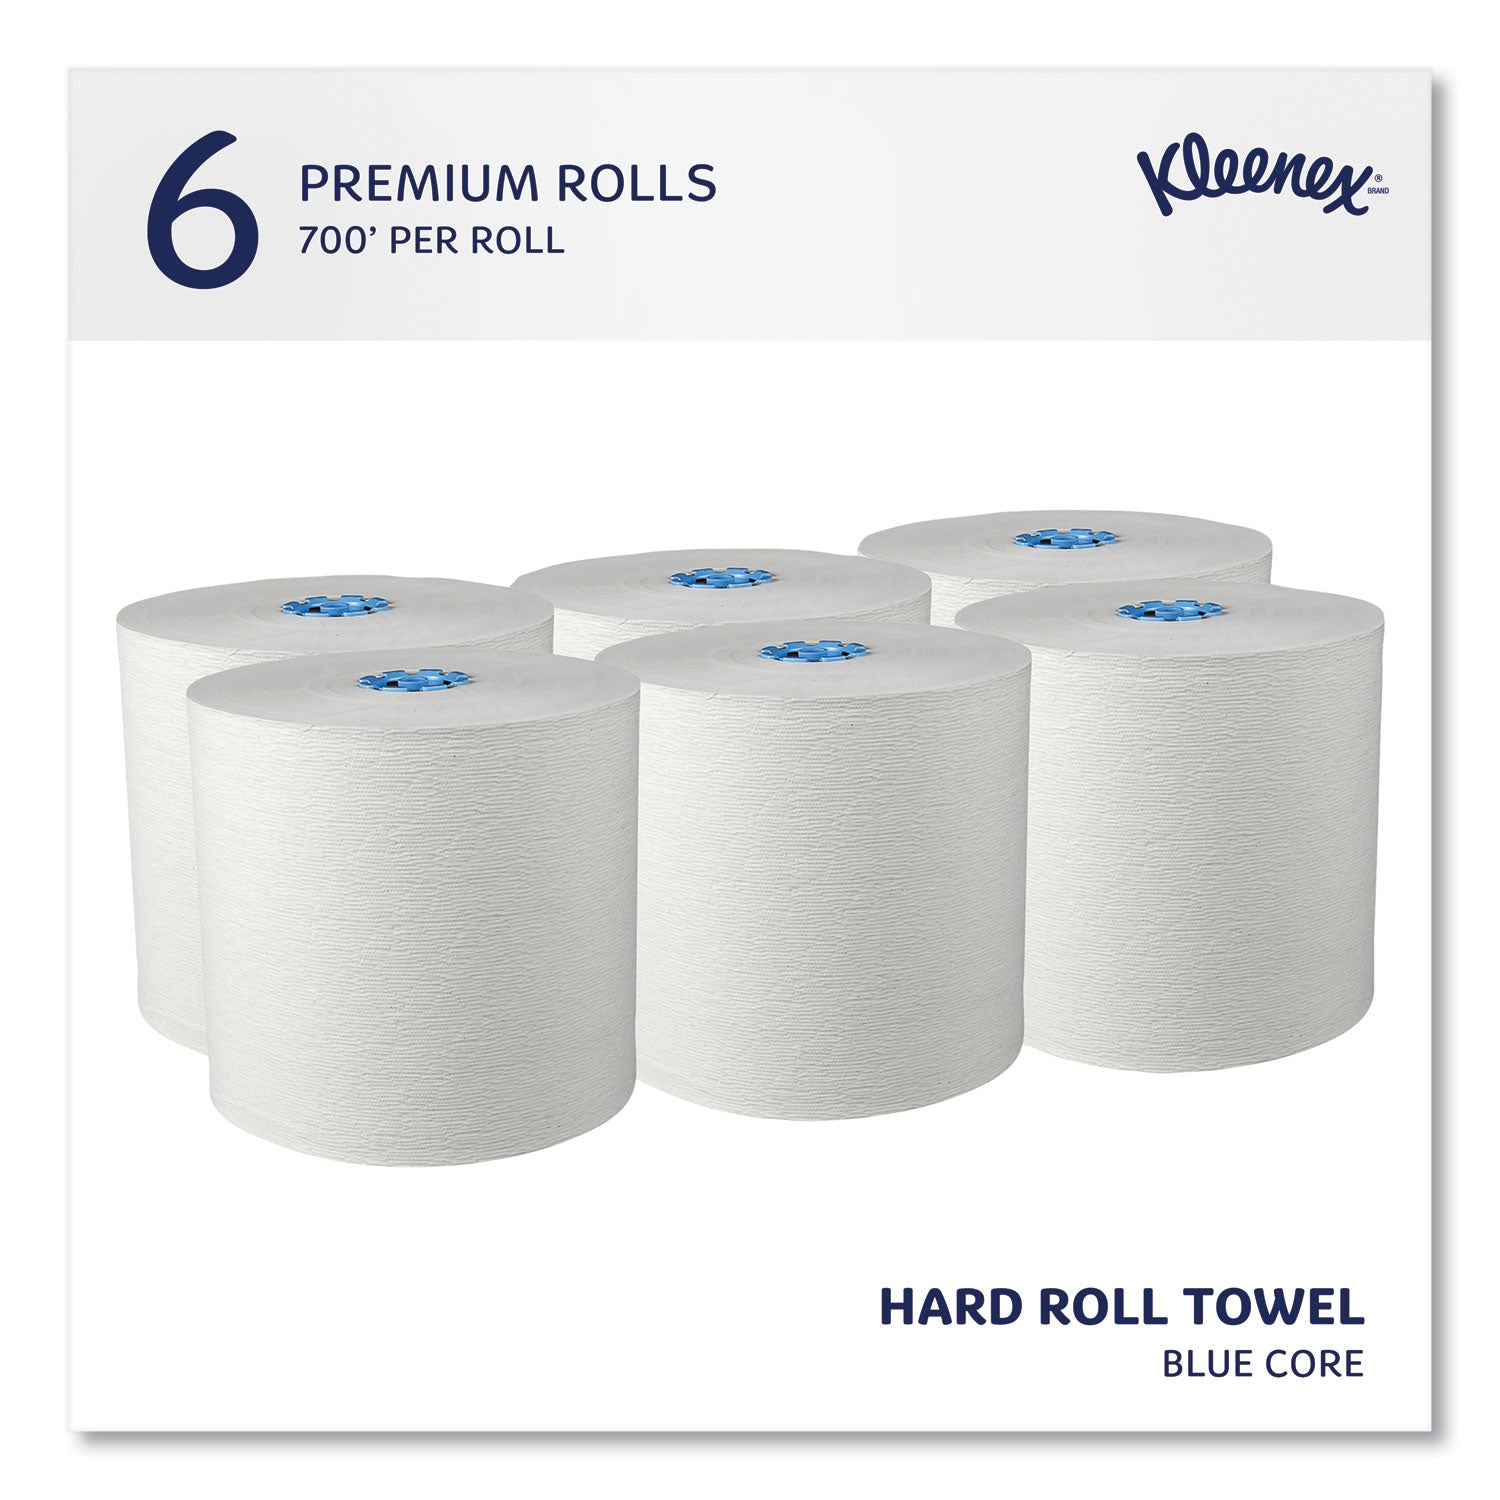 hard-roll-paper-towels-with-premium-absorbency-pockets-with-colored-core-blue-core-1-ply-75-x-700-ft-white-6-rolls-ct_kcc25637 - 2